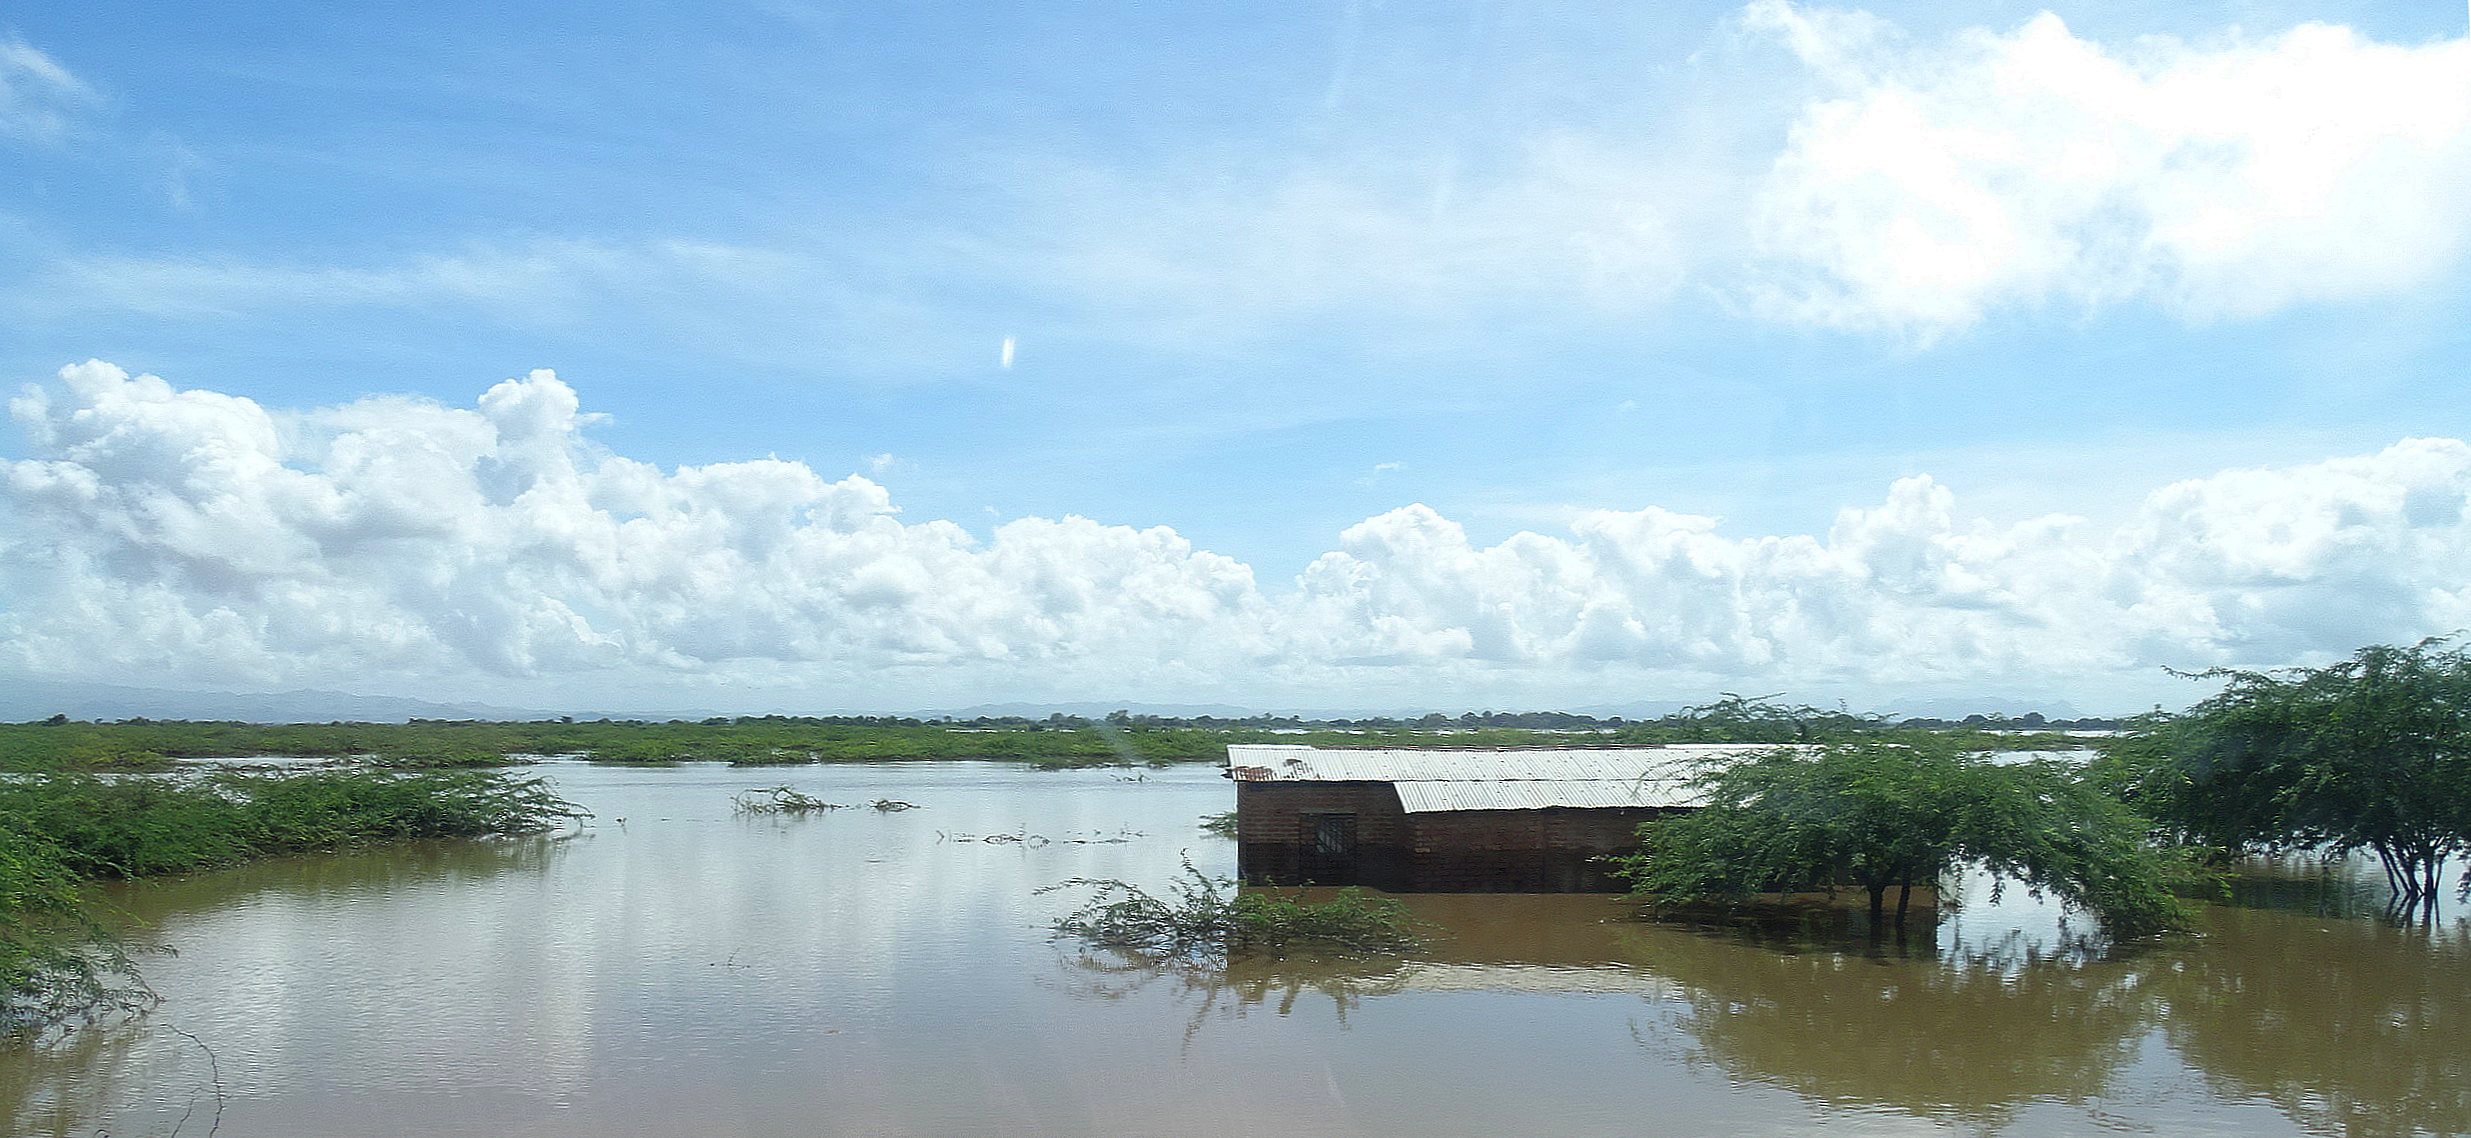 This is one of the submerged homes hit hard by flooding after Cyclone Idai in Malawi. Family belongings and livestock were swept away by the rising water. Photo by Francis Nkhoma, UM News.